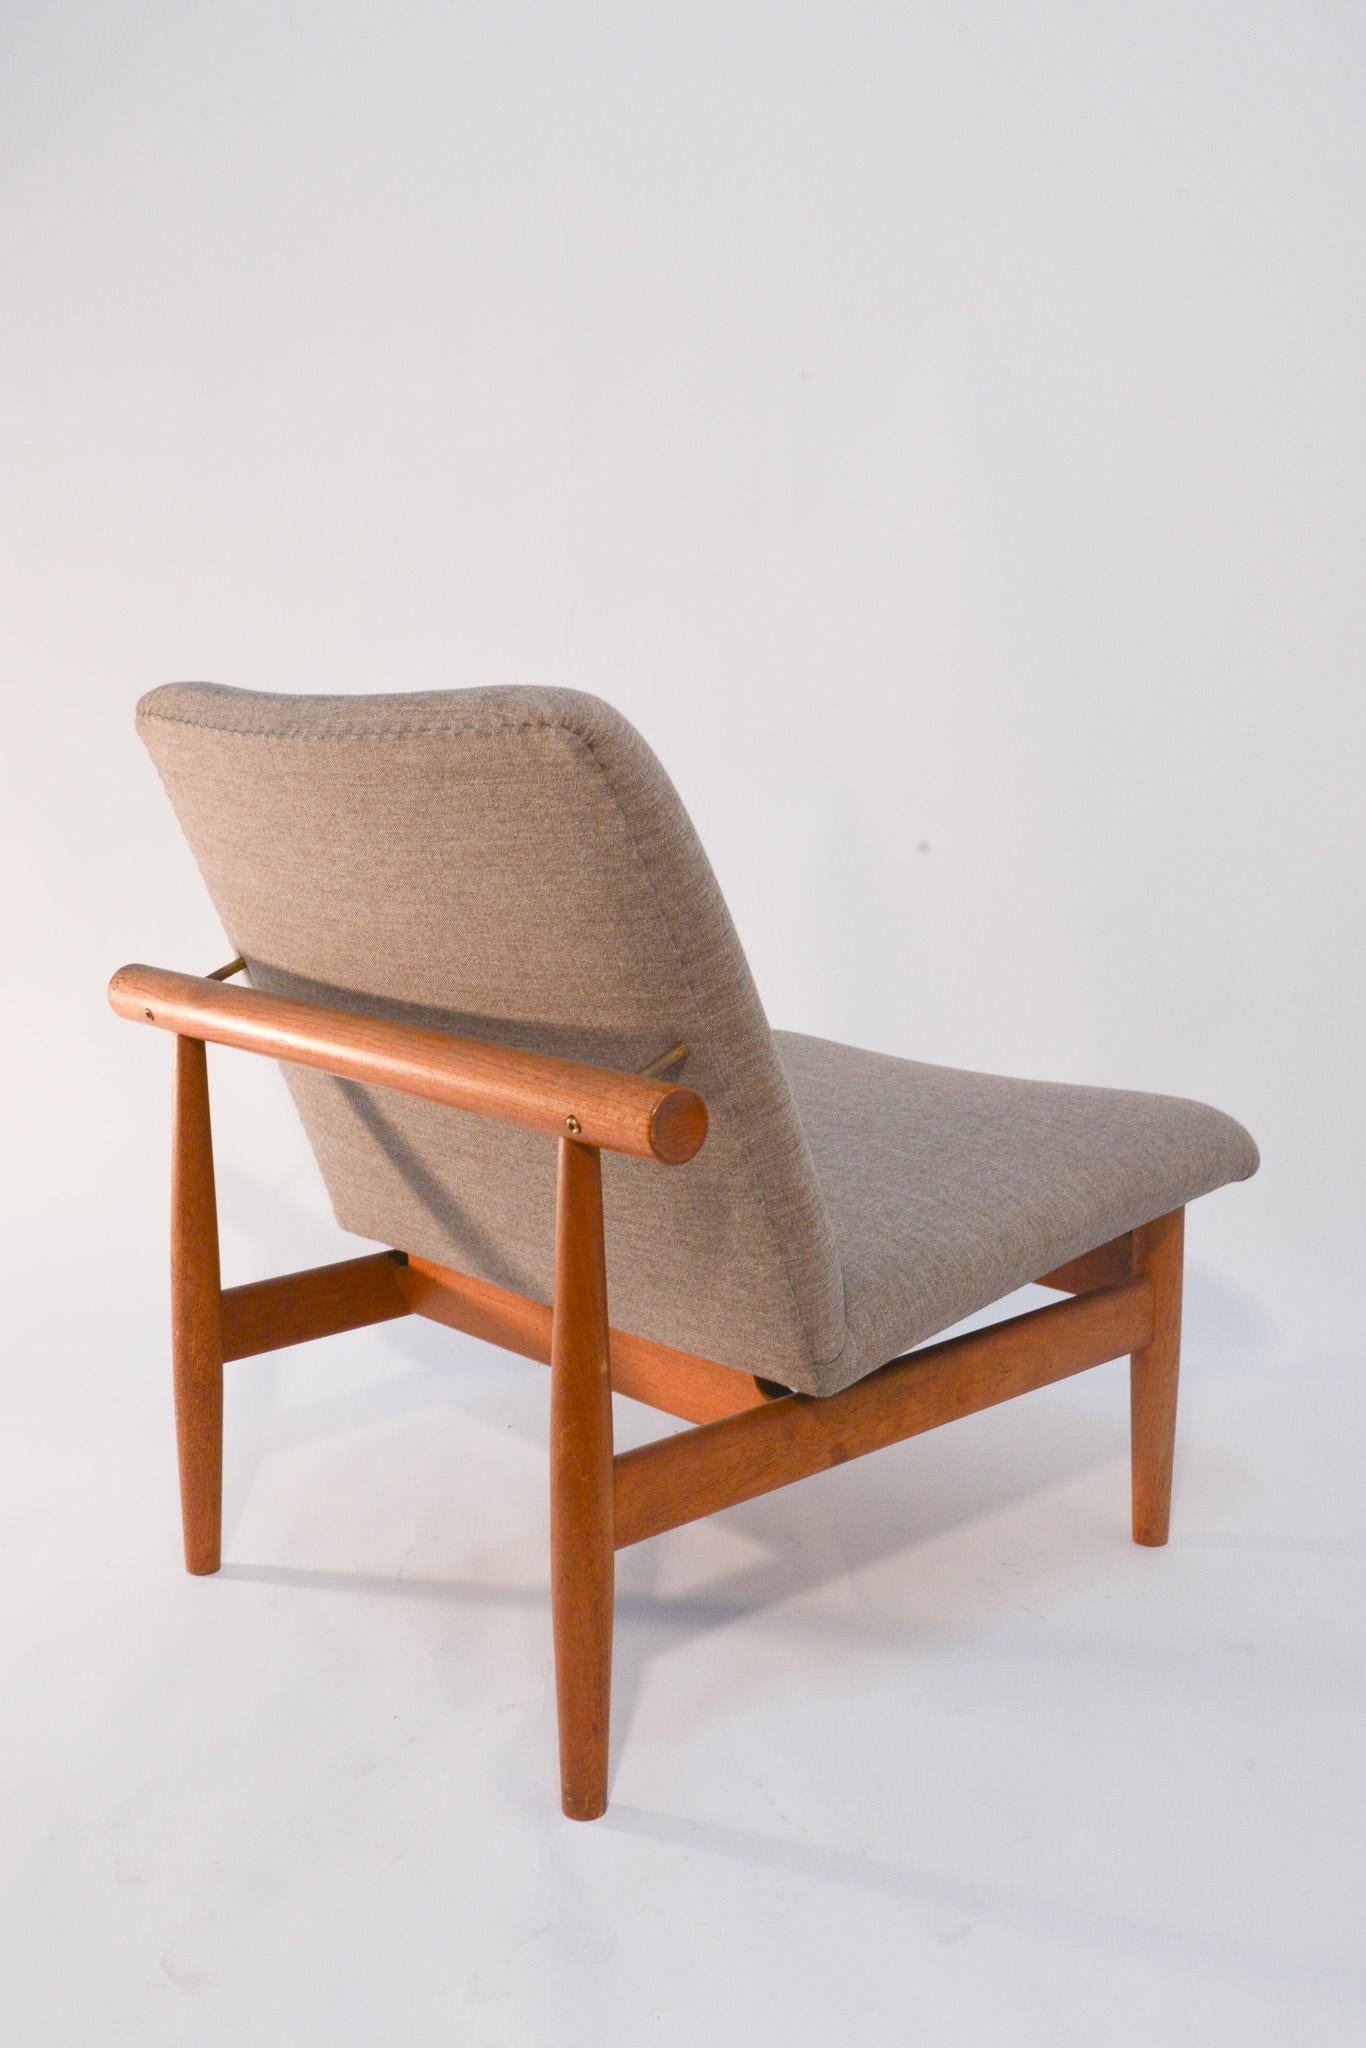 This iconic chair was designed by Finn Juhl in 1957 and relaunched in 2007. The chair is part of Juhl's Japan line and takes inspiration from traditional Japanese building techniques. Its simple form is built from solid wood and brass fittings and